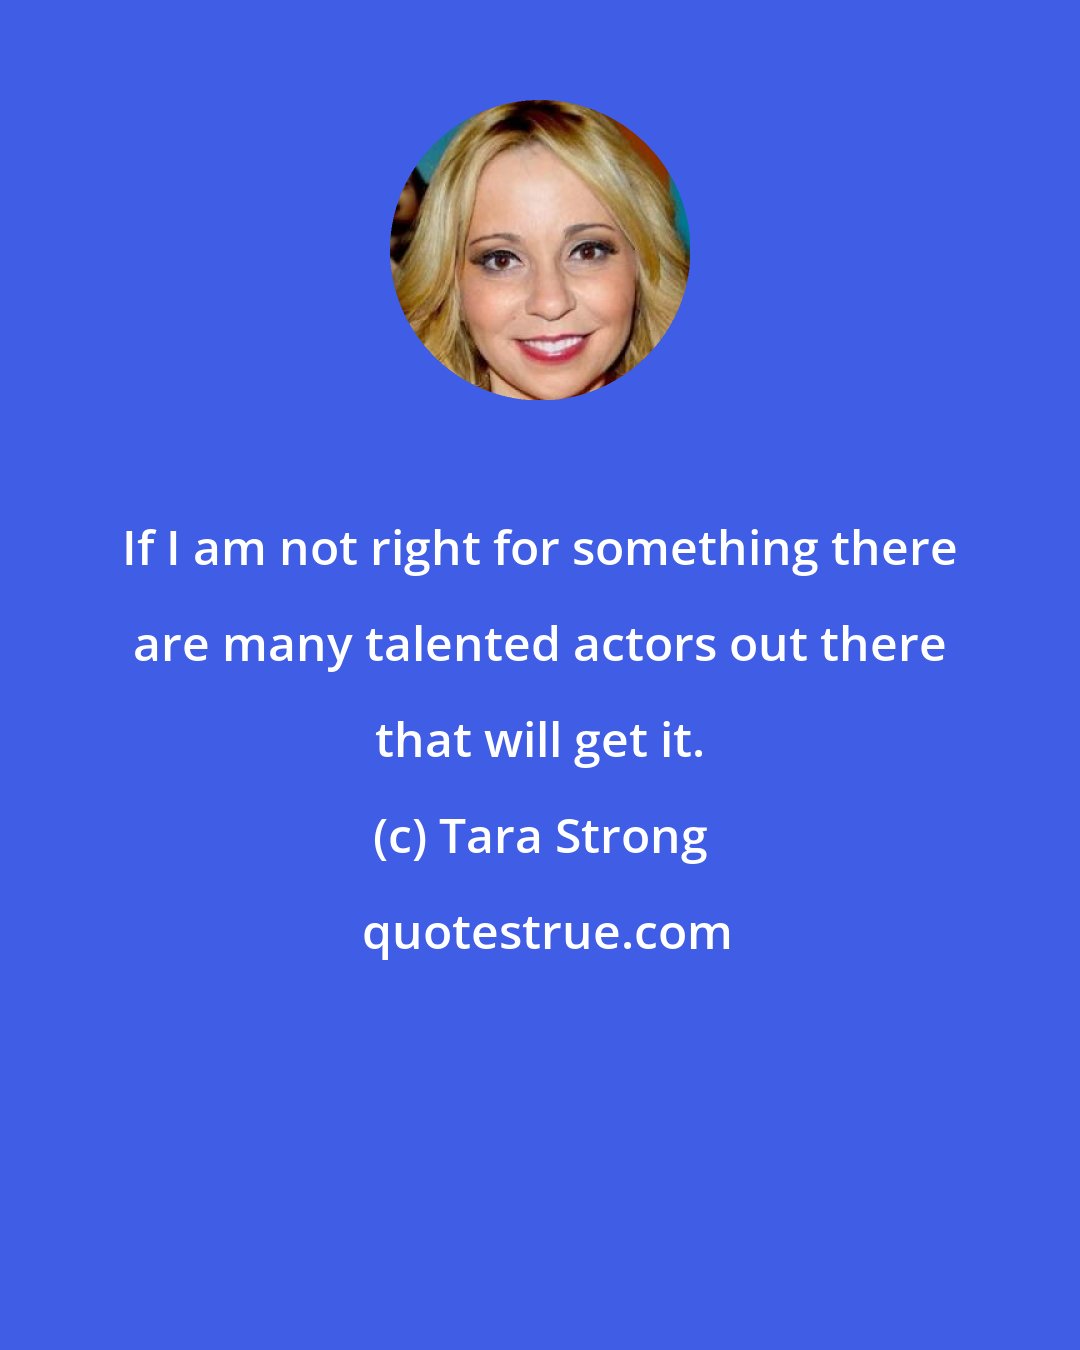 Tara Strong: If I am not right for something there are many talented actors out there that will get it.